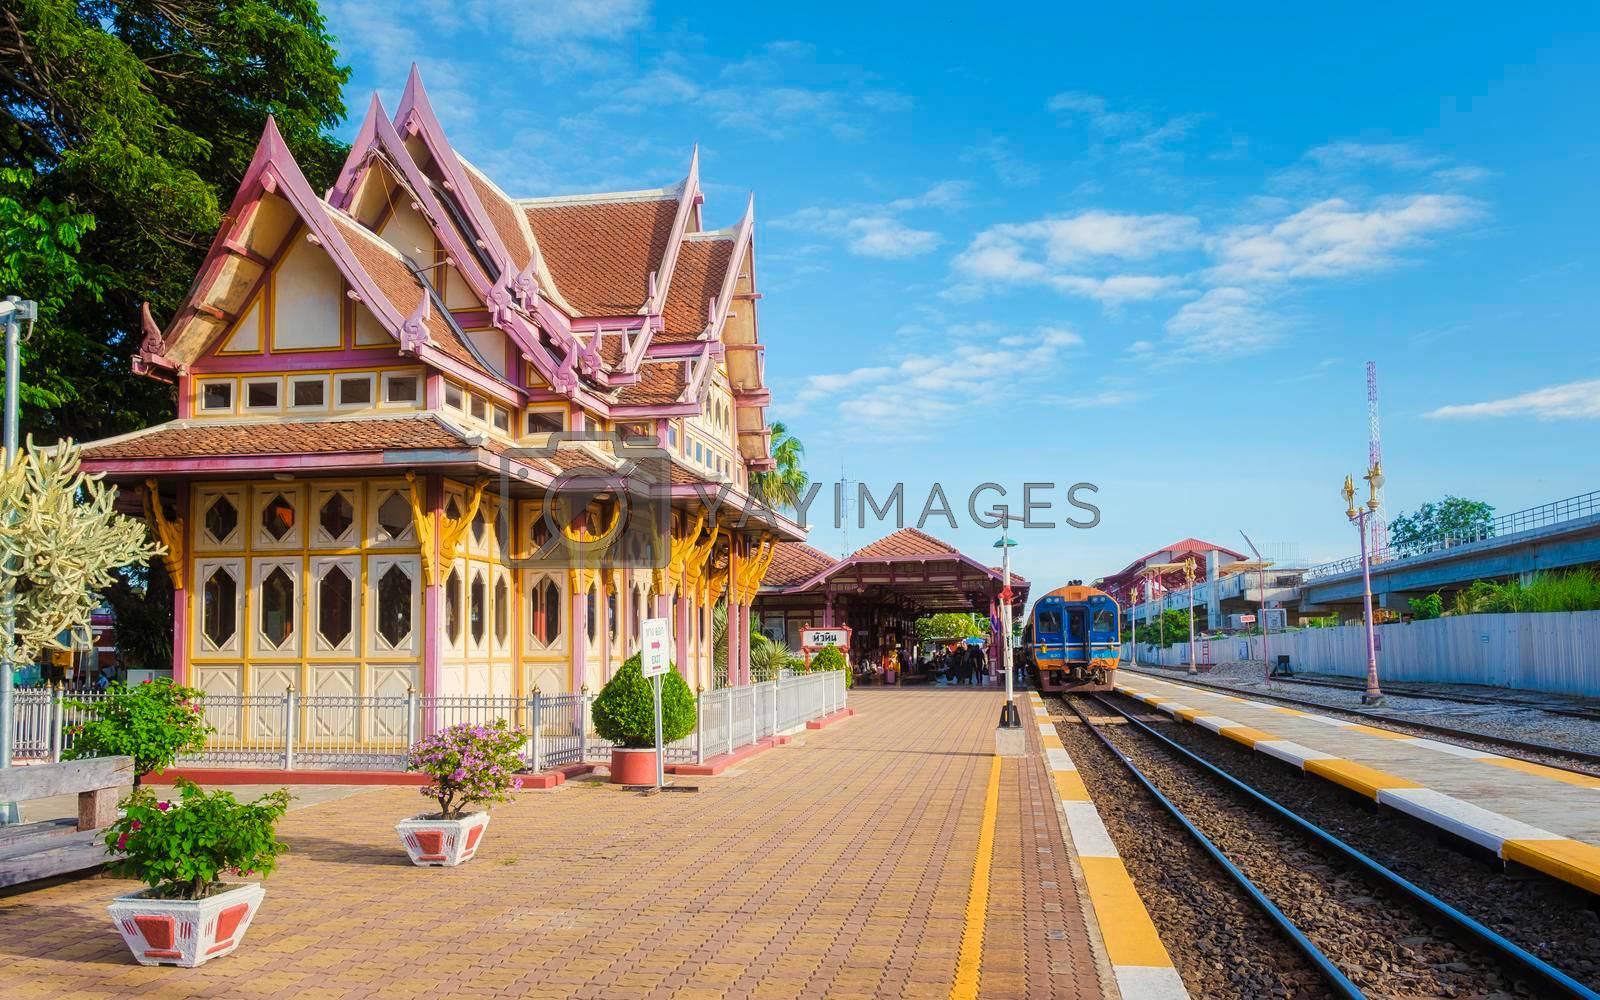 Royalty free image of Hua Hin train station in Thailand on a bright day by fokkebok